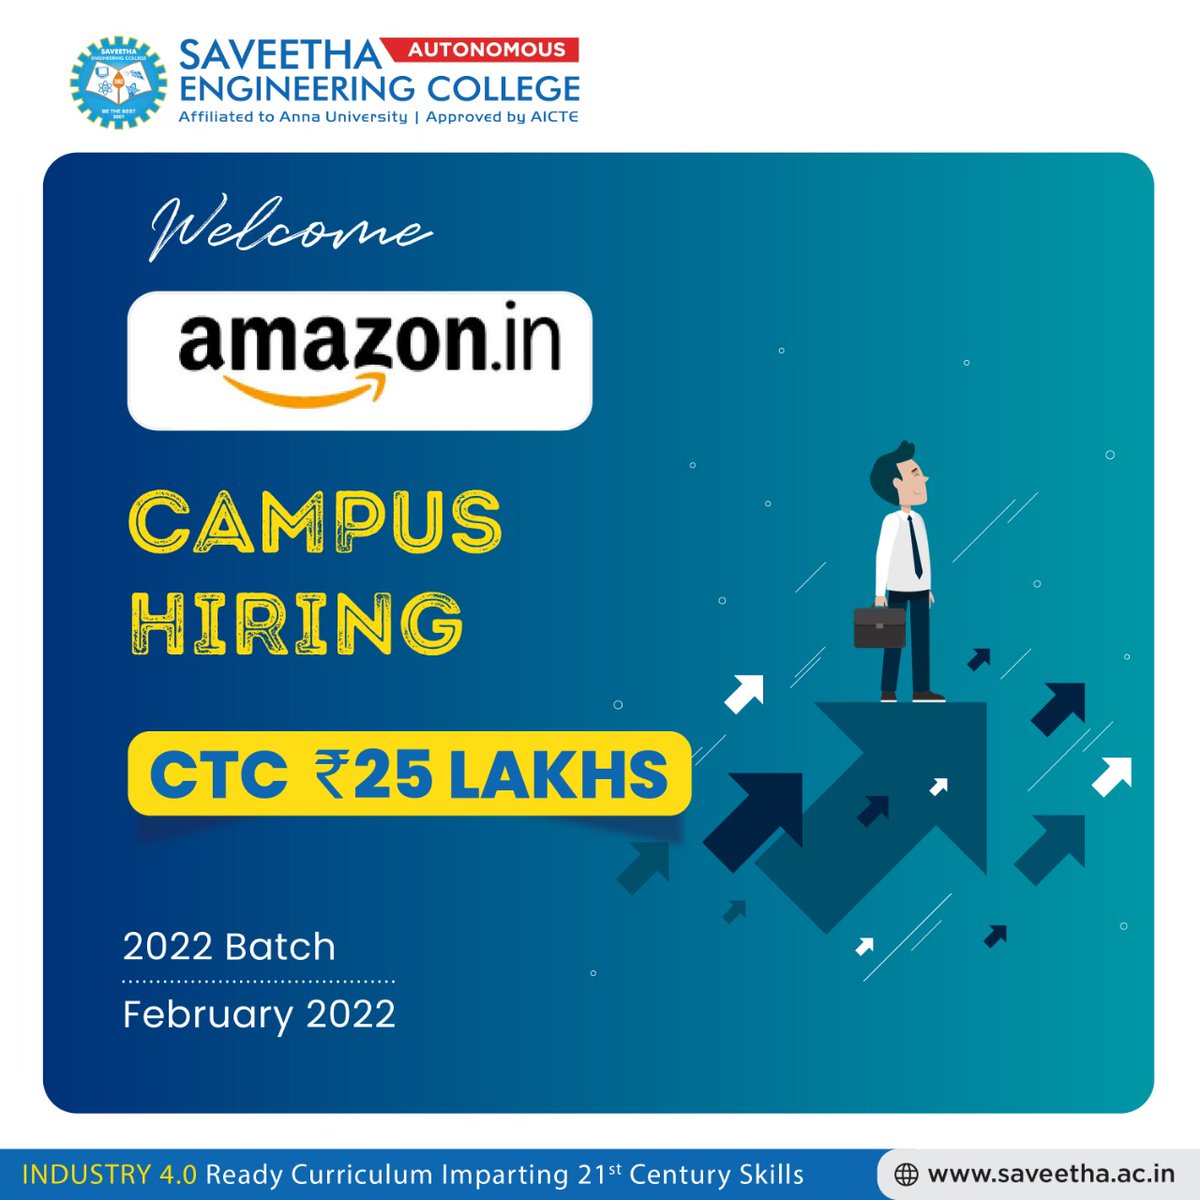 Welcome, 𝗔𝗺𝗮𝘇𝗼𝗻 for the 𝗖𝗮𝗺𝗽𝘂𝘀 𝗛𝗶𝗿𝗶𝗻𝗴 drive for the 2022 Batch. Best wishes to students who registered for this exclusive hiring event.
𝗩𝗶𝘀𝗶𝘁 𝘂𝘀: saveetha.ac.in
#amazon #amazoncareer #AmazonJobs #placements #placements2022 #campushiring